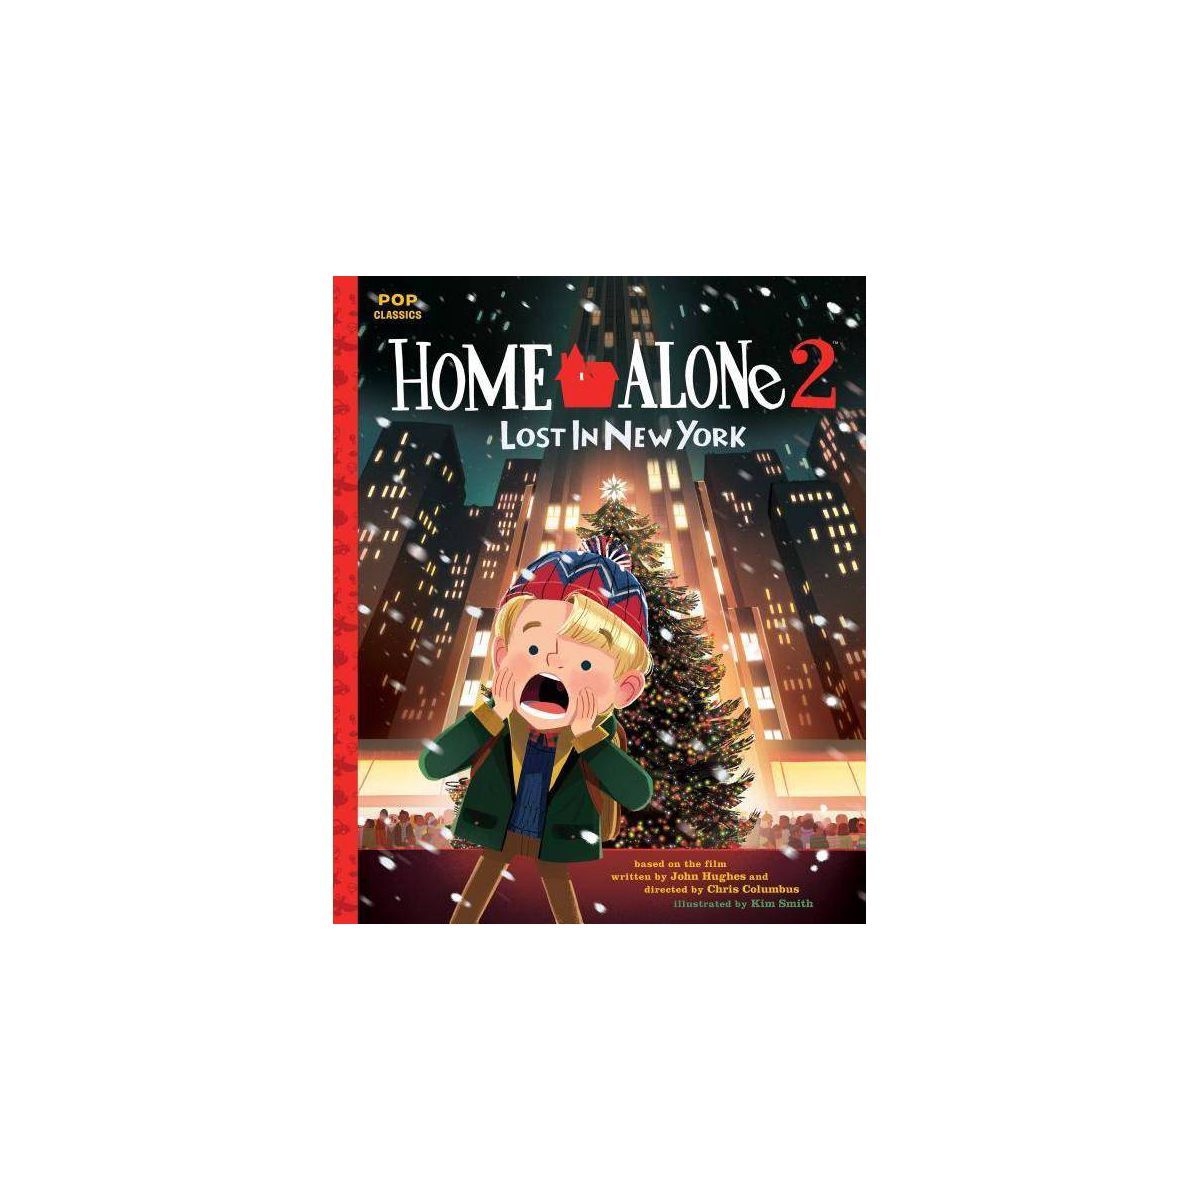 Home Alone 2: Lost in New York (Pop Classics) - by Kim Smith (Hardcover) | Target